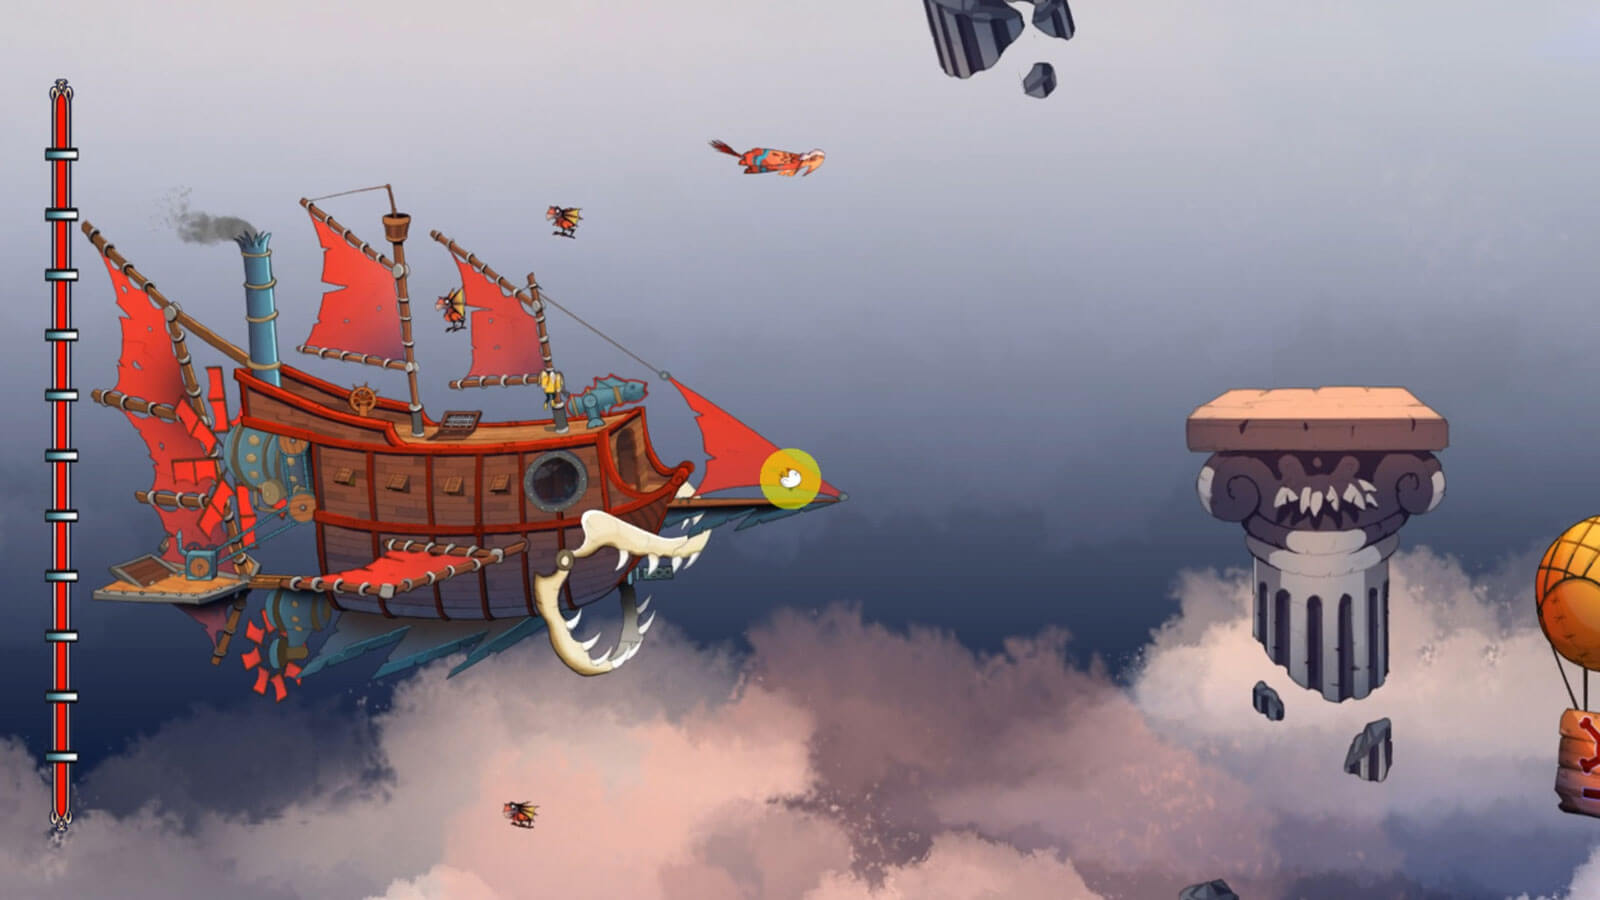 A pirate ship flies through the clouds and rubble